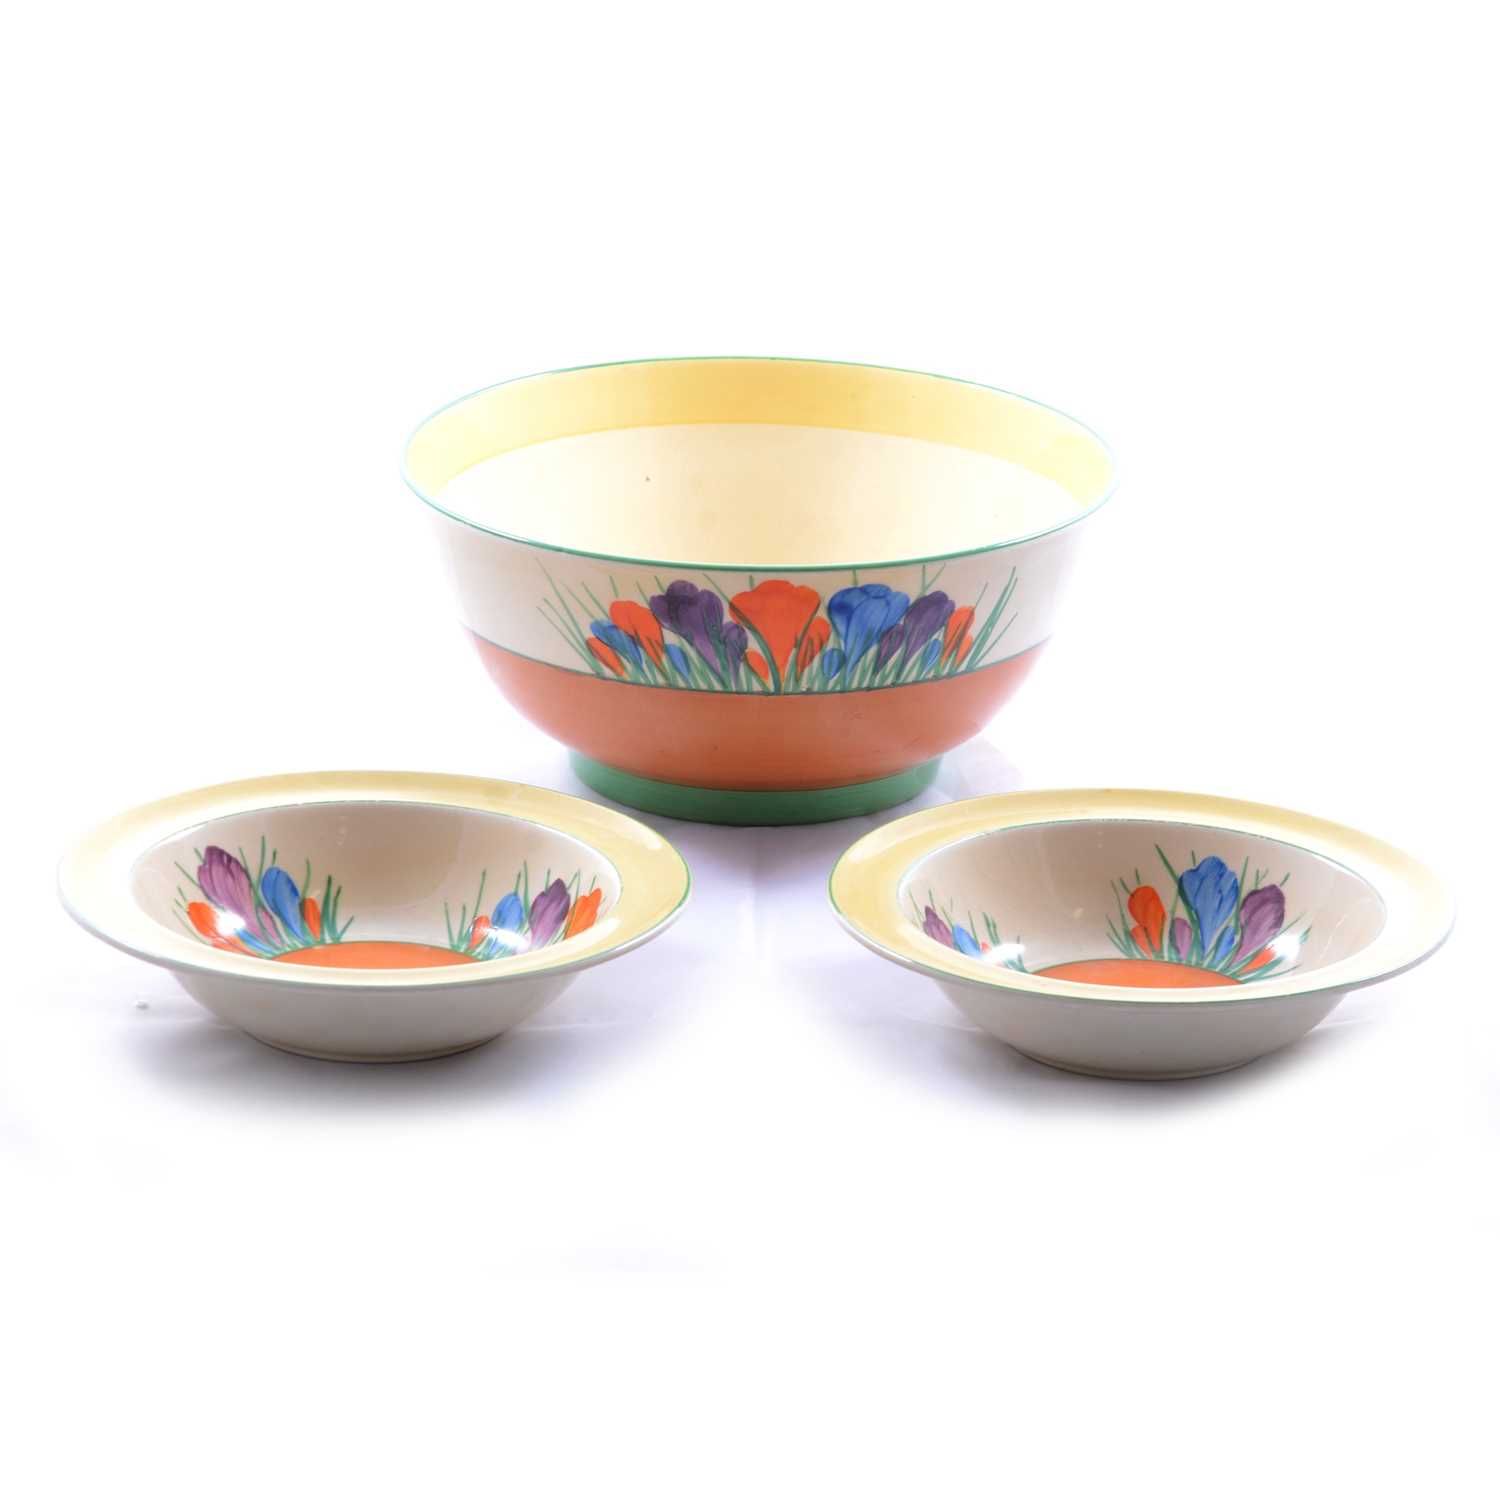 Clarice Cliff, a large 'Crocus' pattern fruit bowl and two smaller bowls